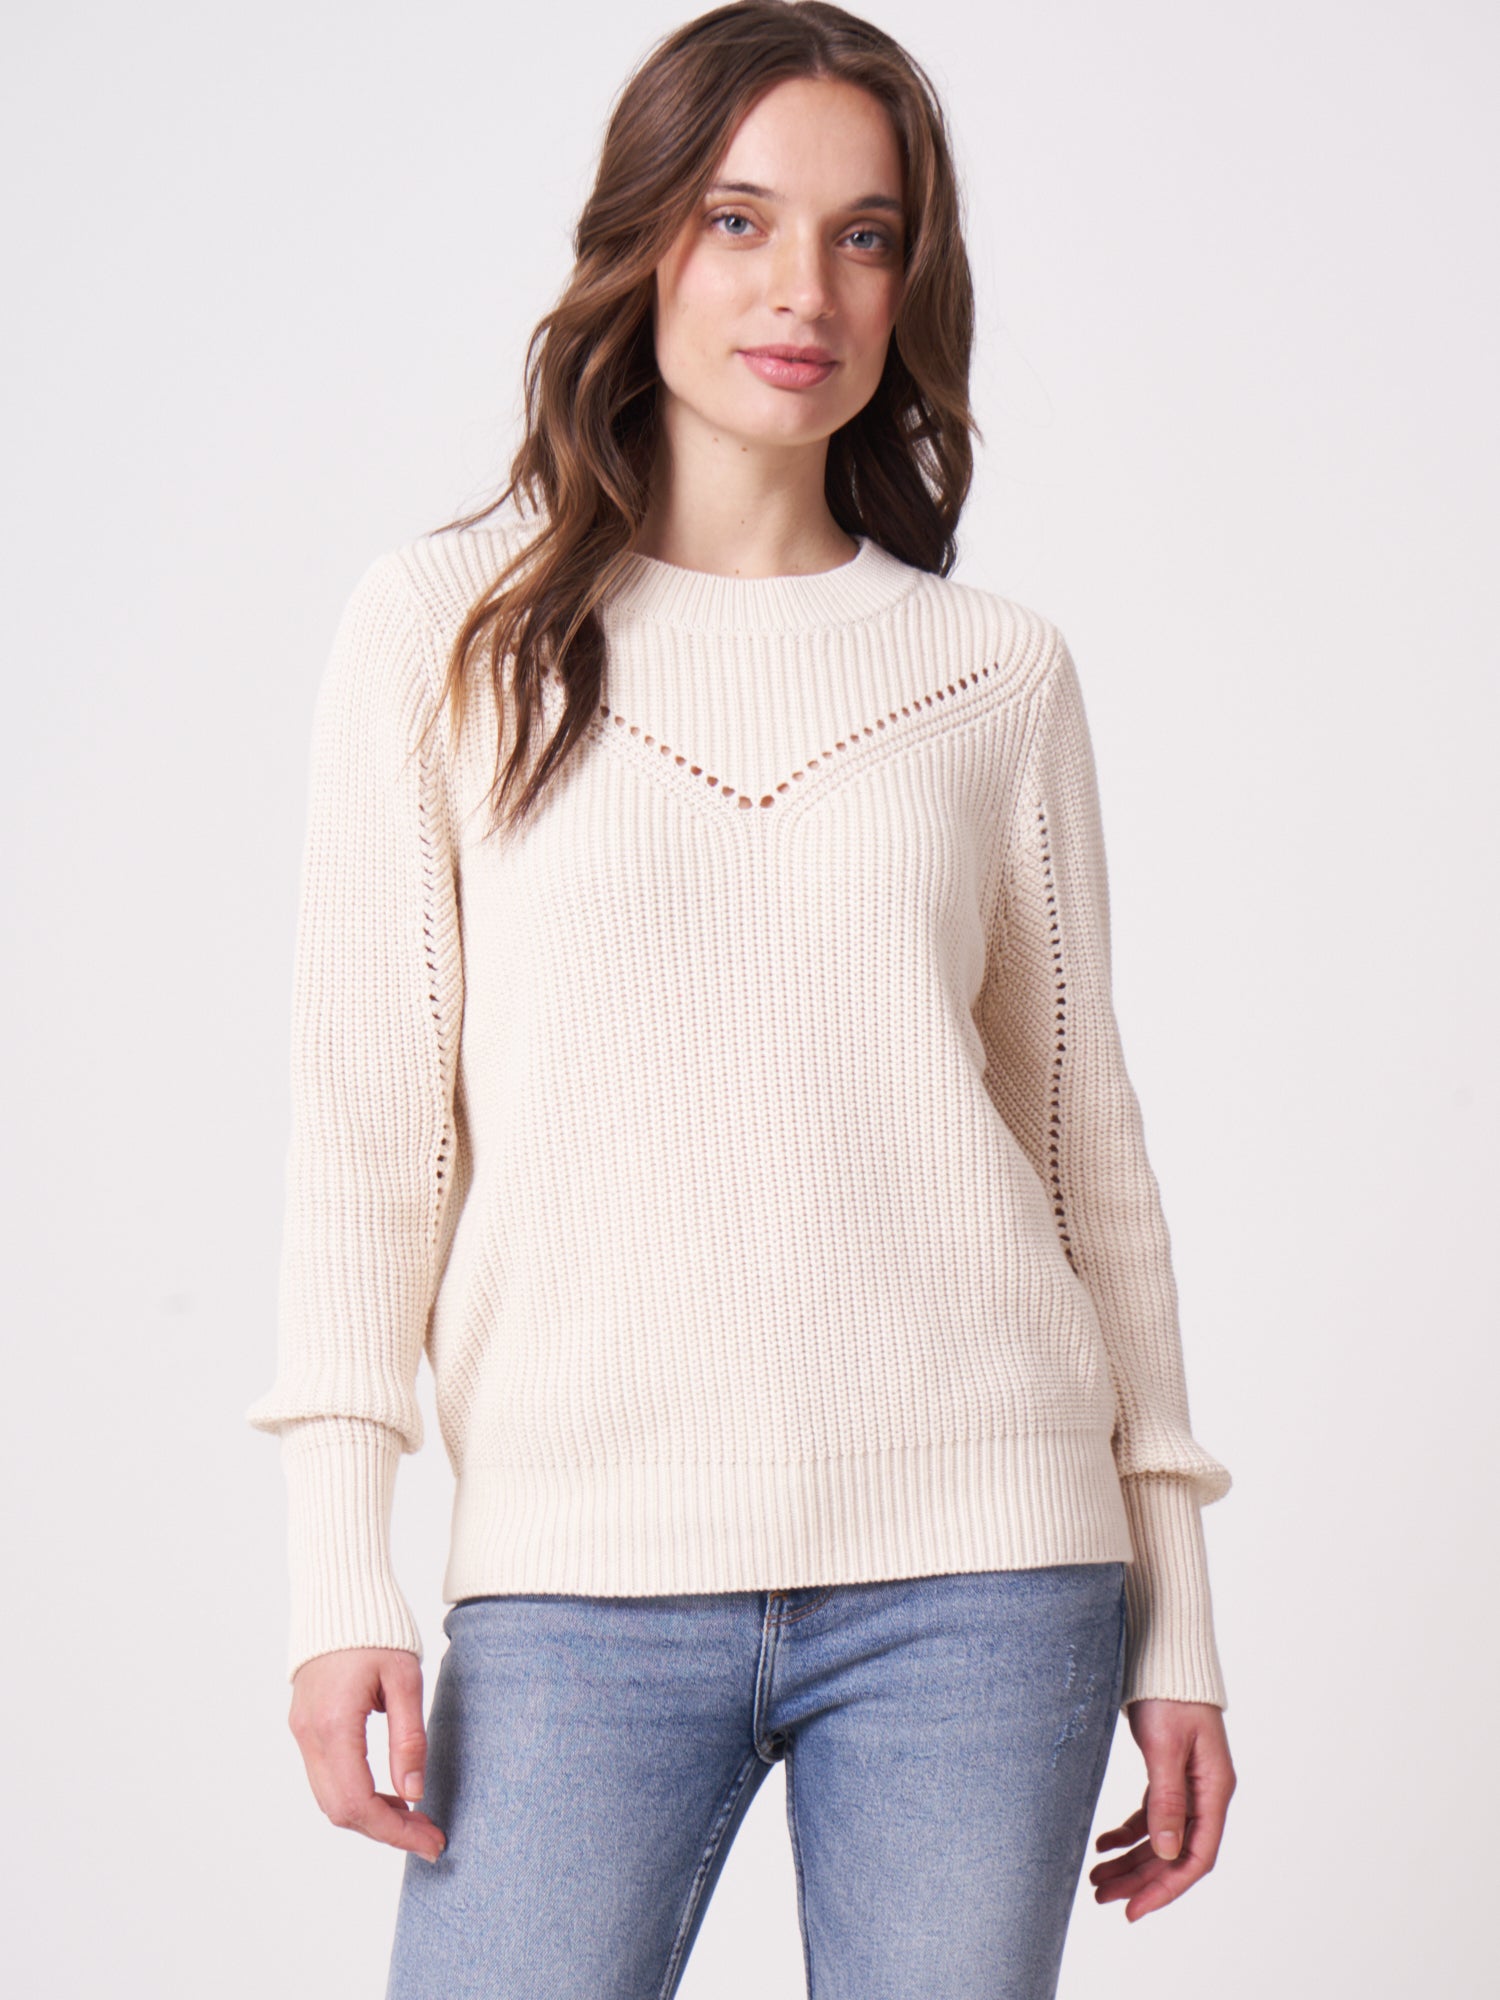 Repeat Knit Sweater - 2 Colours